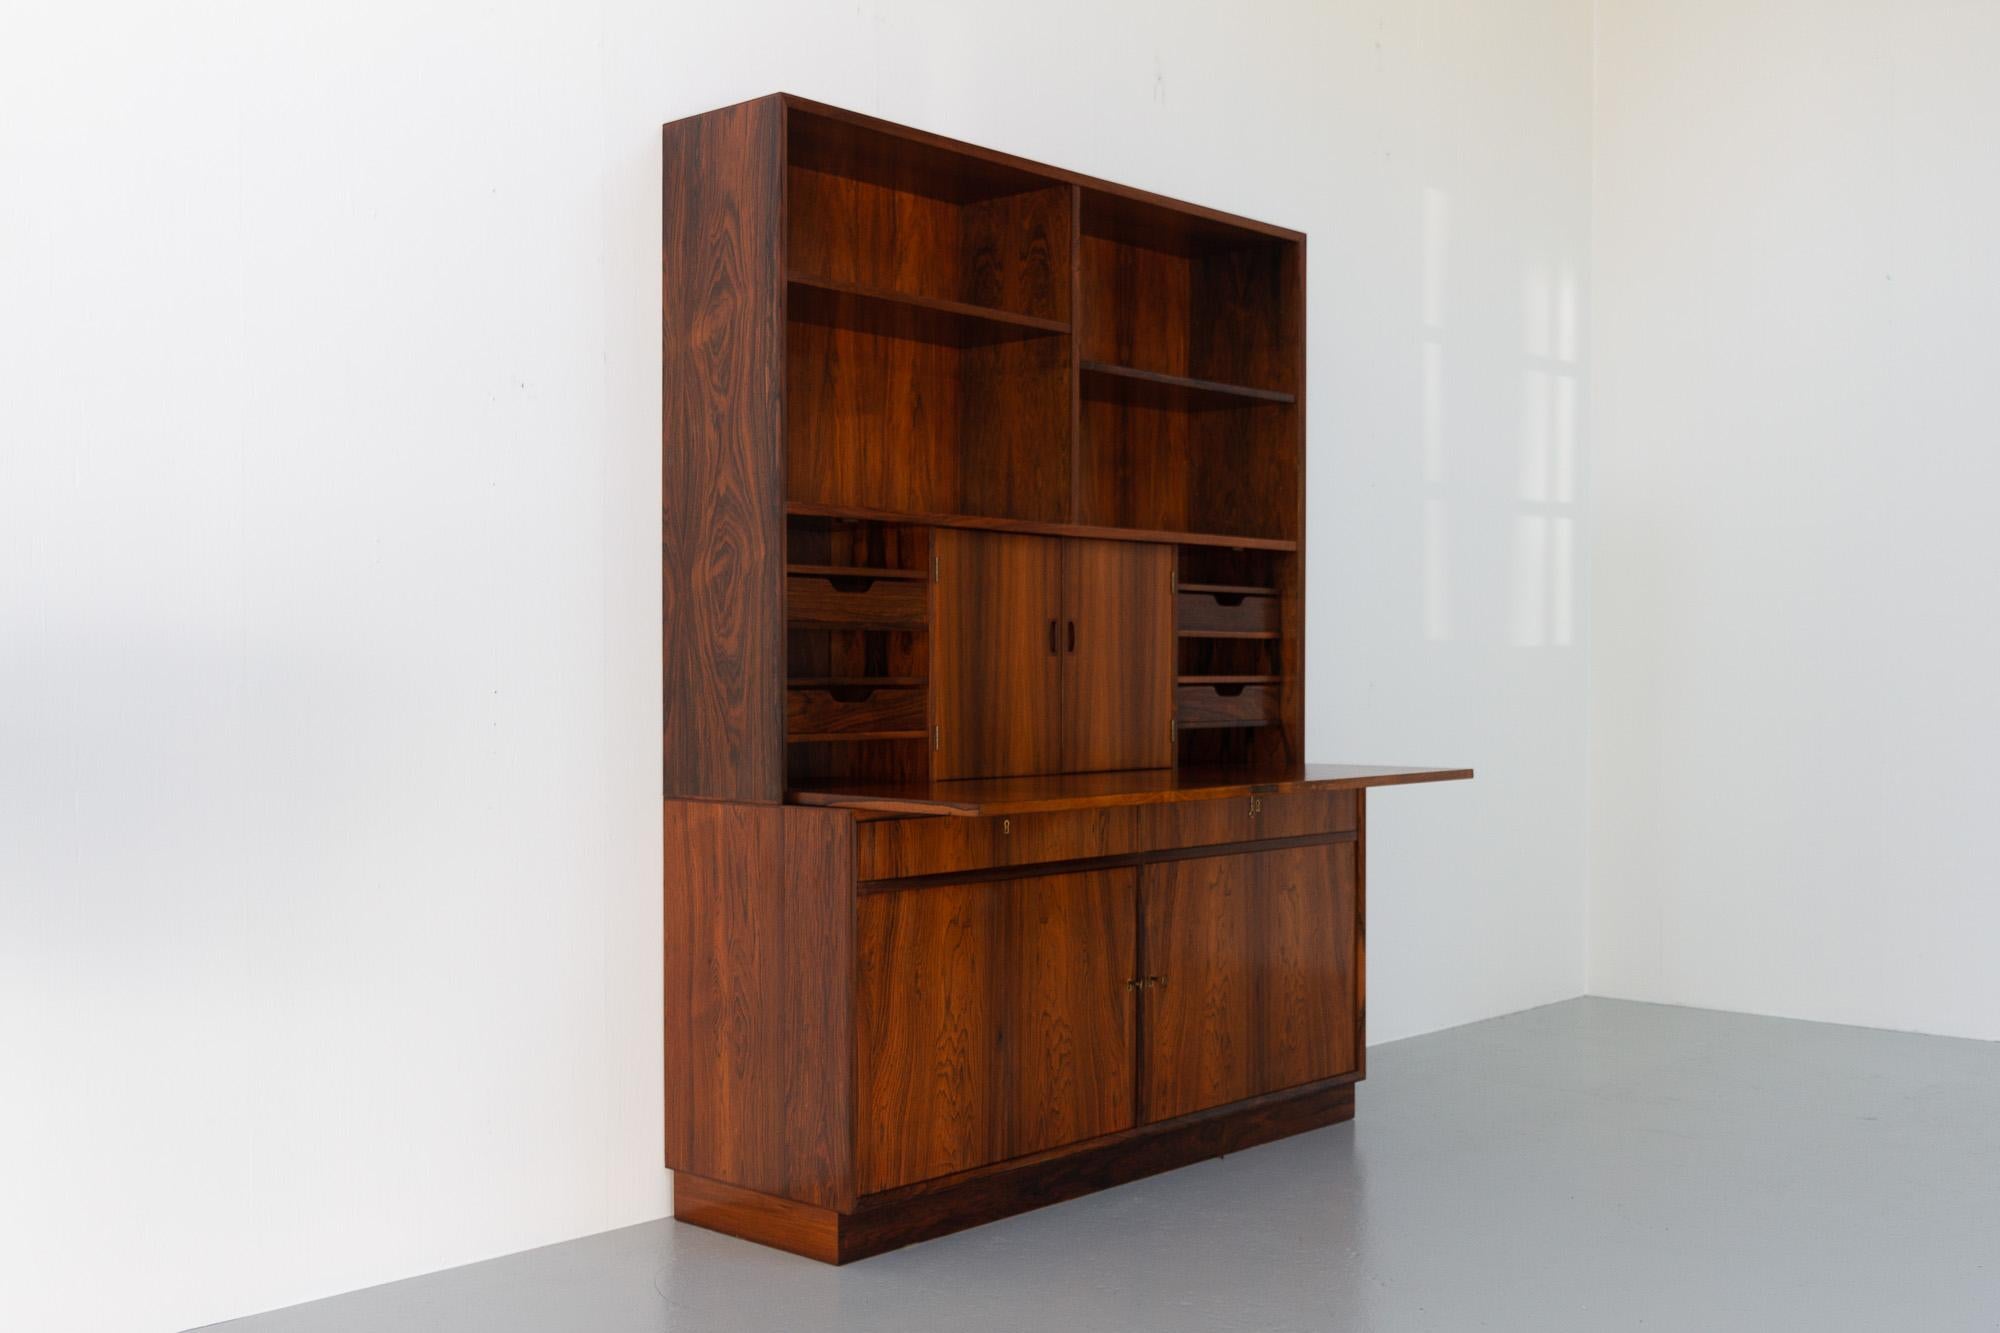 Mid-Century Modern Danish Rosewood Bookcase with Desk, 1960s.
Beautiful and elegant Scandinavian Modern two part bookcase. Lower sideboard with two drawers and two hinged doors offers loads of storage space. Upper part with drop down door behind